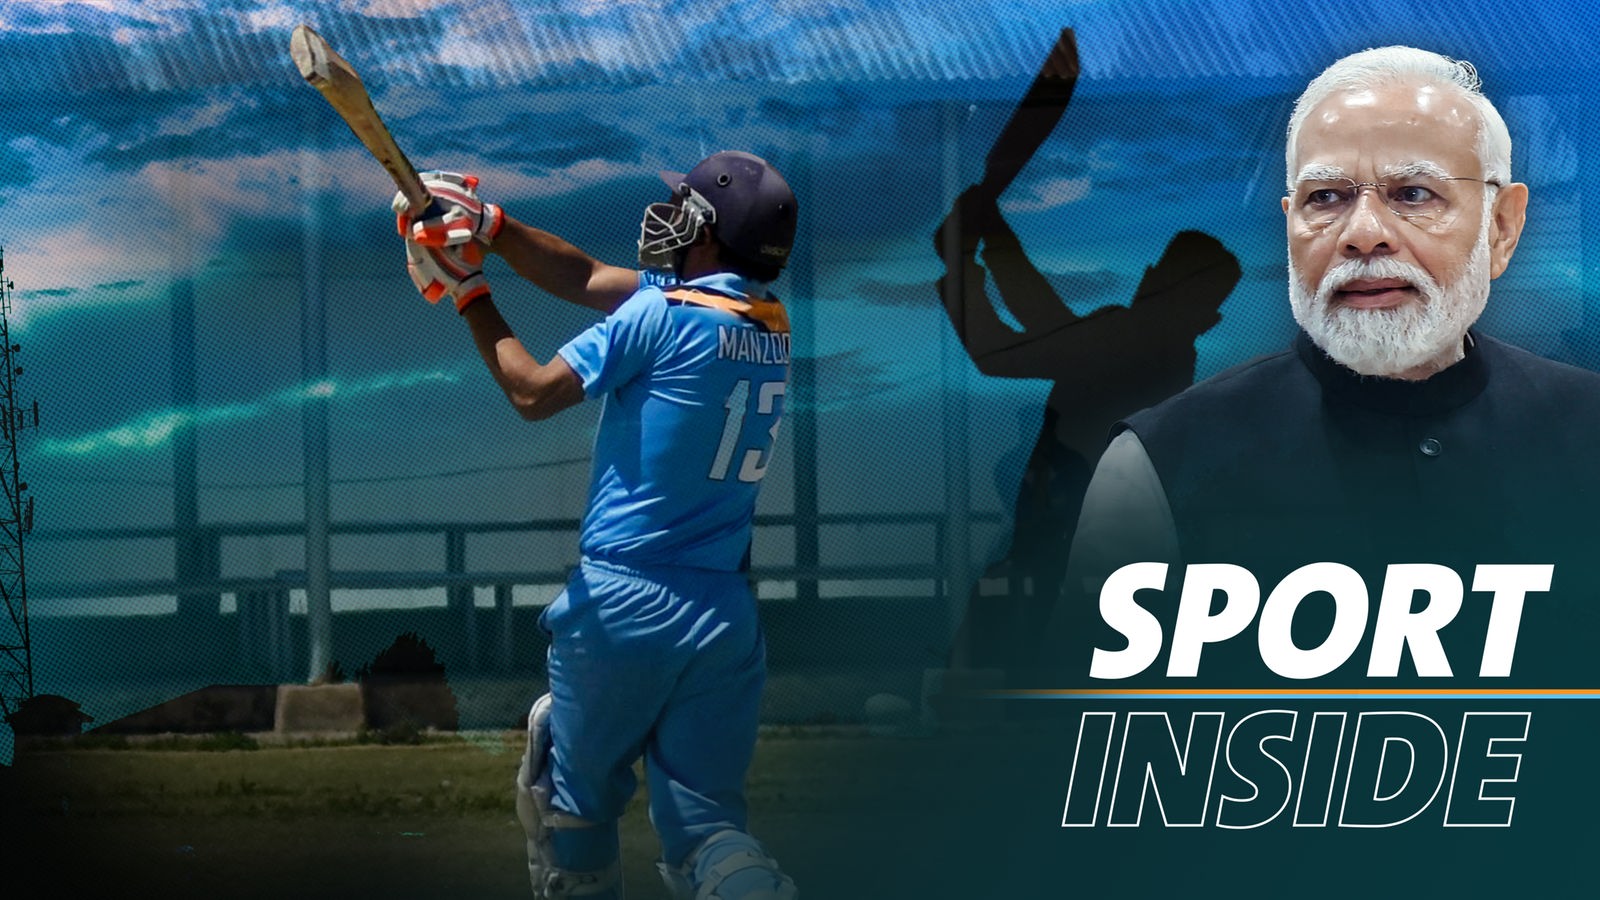 The Cricket World Cup in India: A Closer Look – WDR 5 Sport Inside Podcast